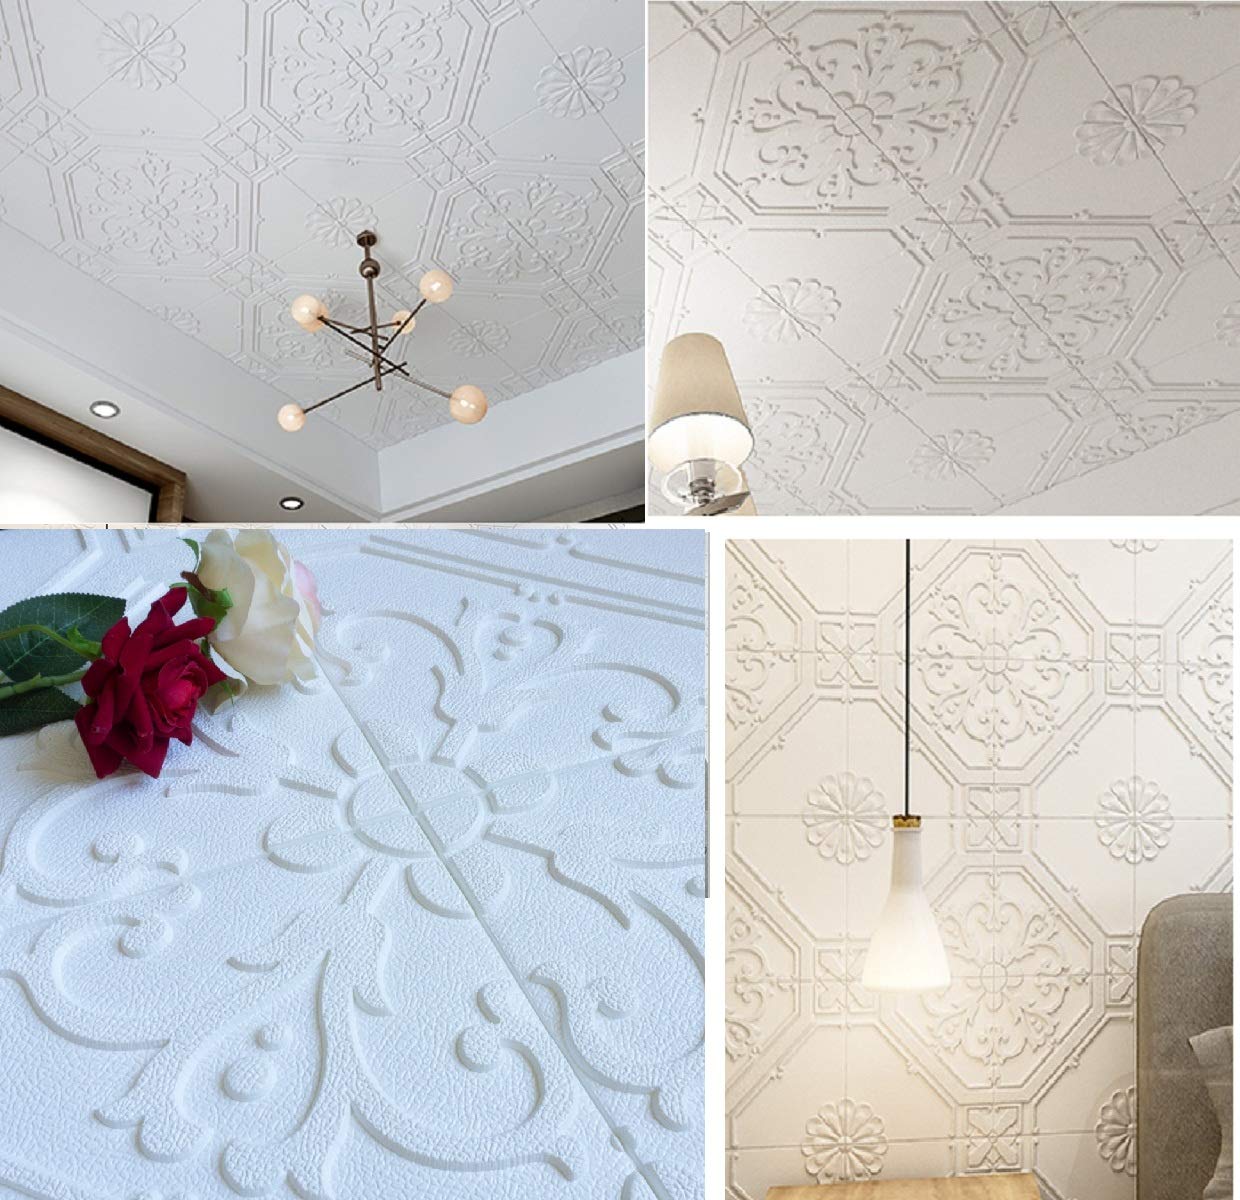 3D Ceiling Tiles Panel Vinyl Wallpaper Stickers Waterproof Foam self-Adhesive Wall Stickers for Home, Living Room, Bedroom Wall Panels Tiles Paper for Decoration((70 * 70 cm)